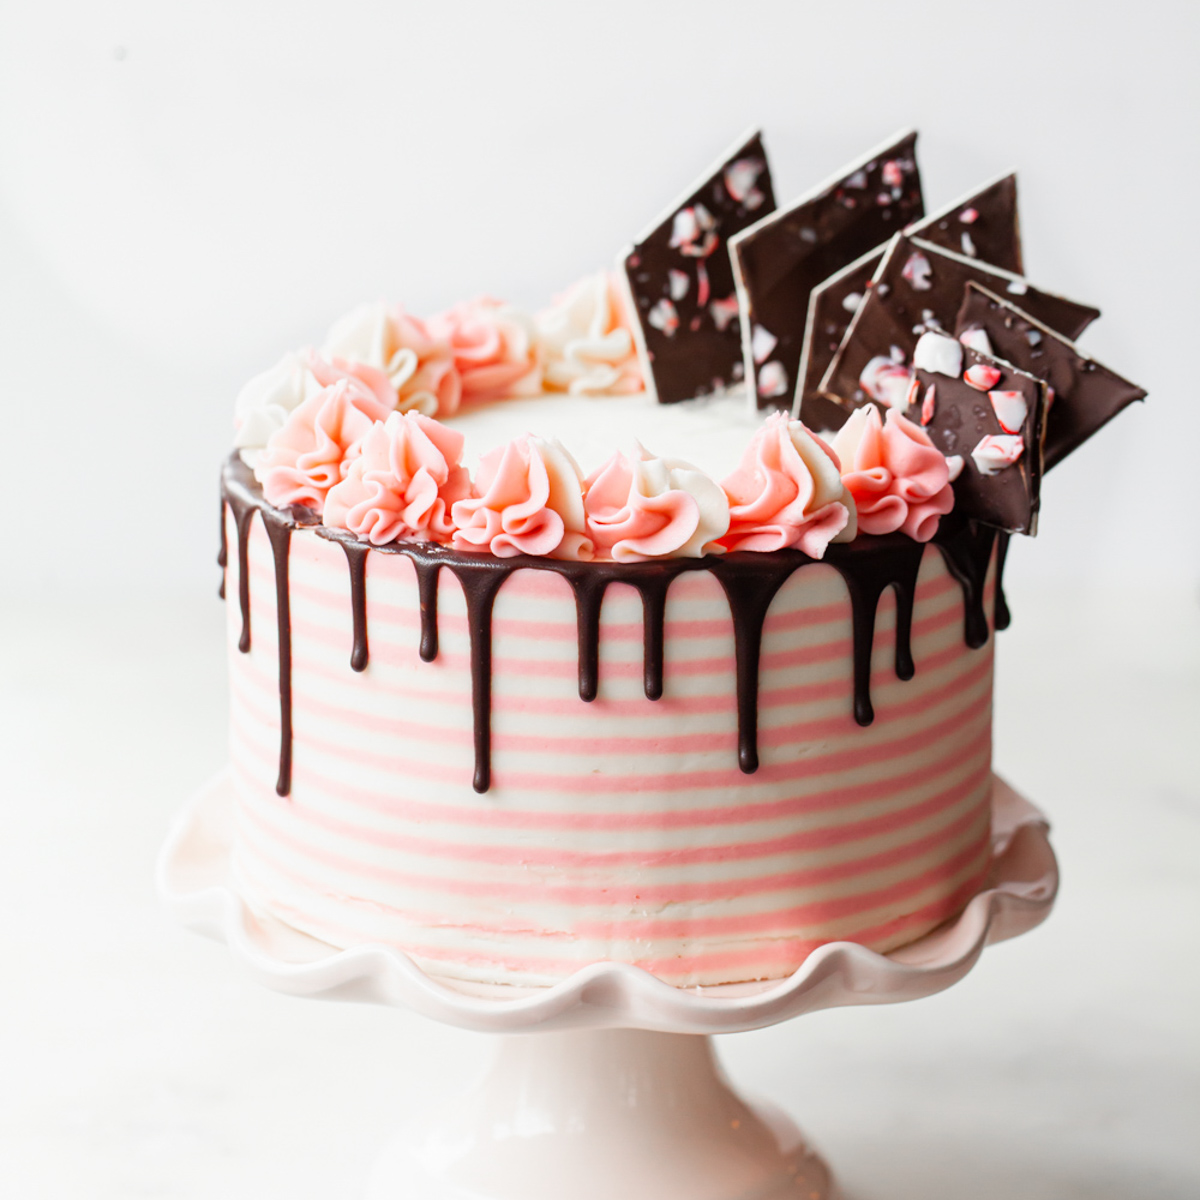 Peppermint Cream Cheese Buttercream Chocolate Cake - The Sugar Coated  Cottage